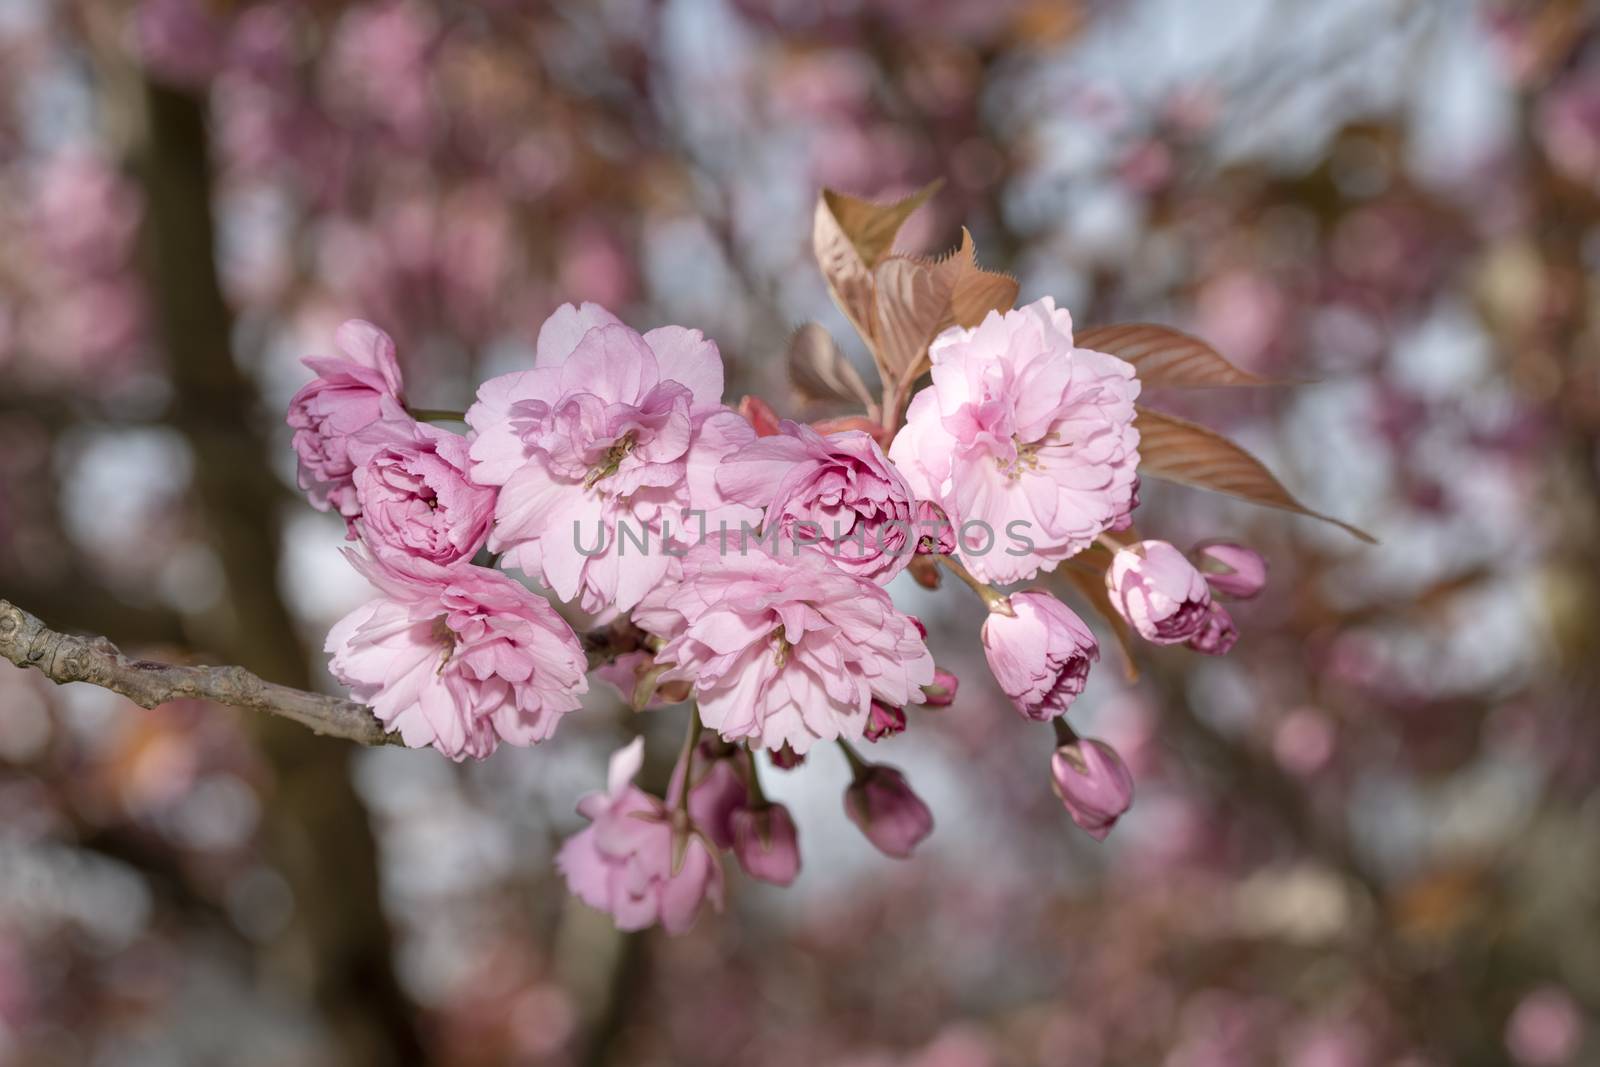 Young pink sakura blossom blooming at the end of a branch in the spring season by ankorlight